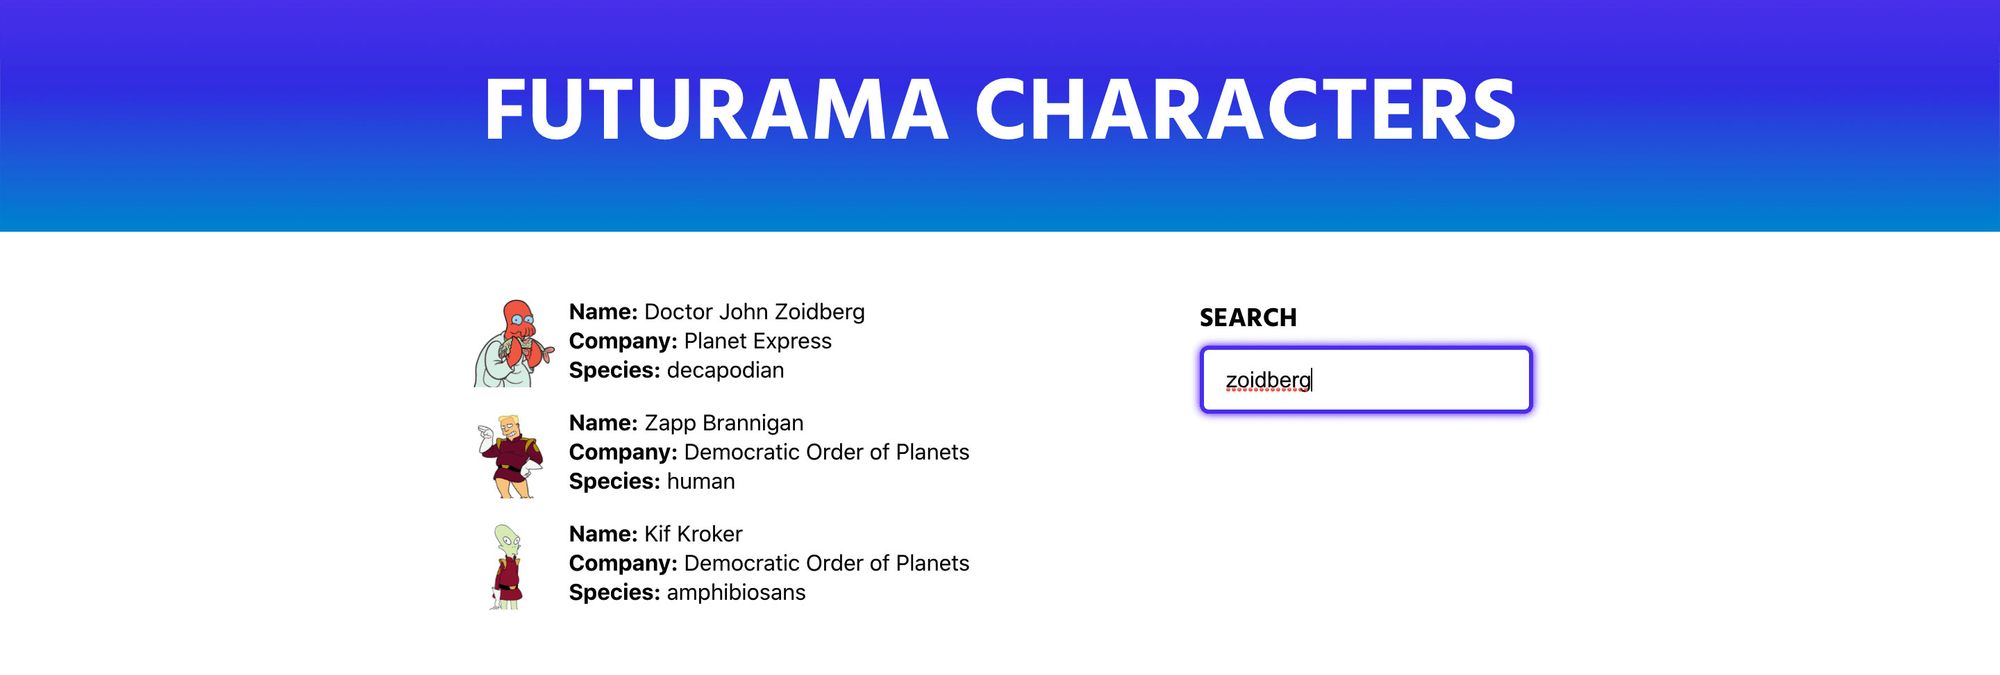 futurama-character-search-results-query